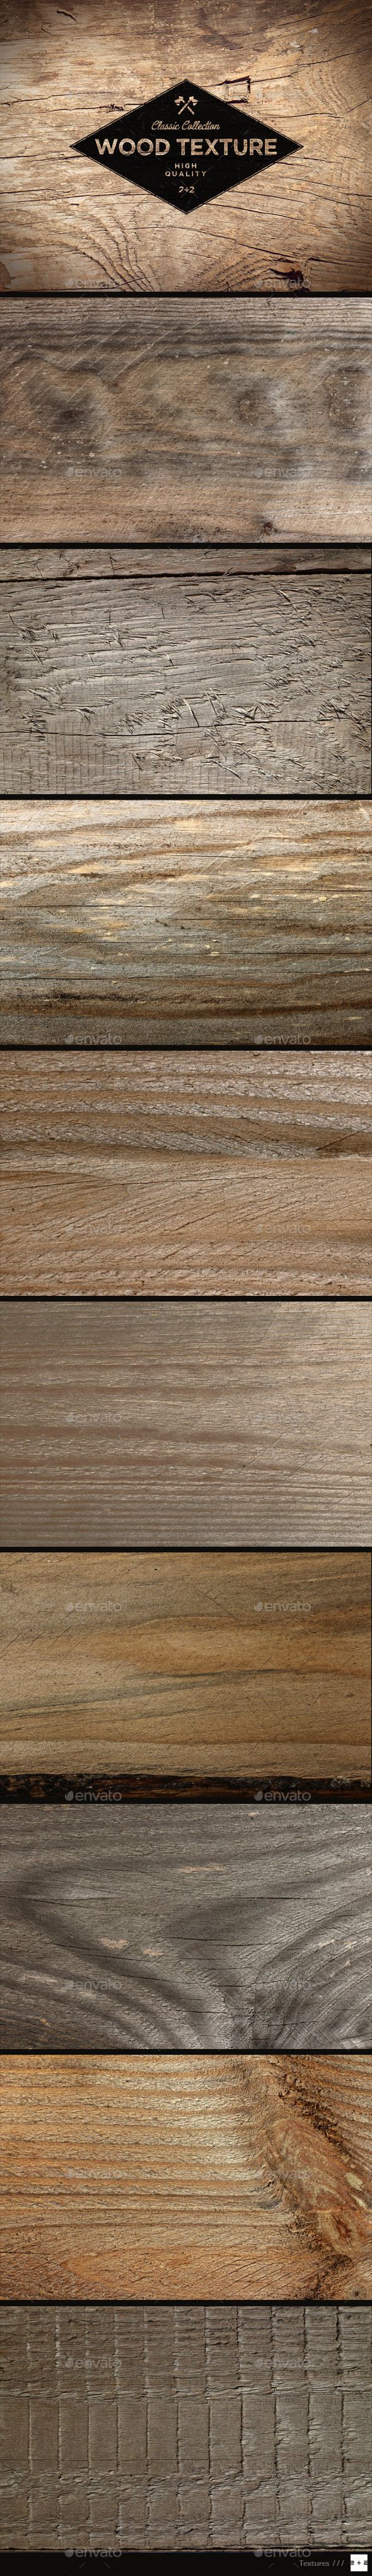 10 wood textures preview